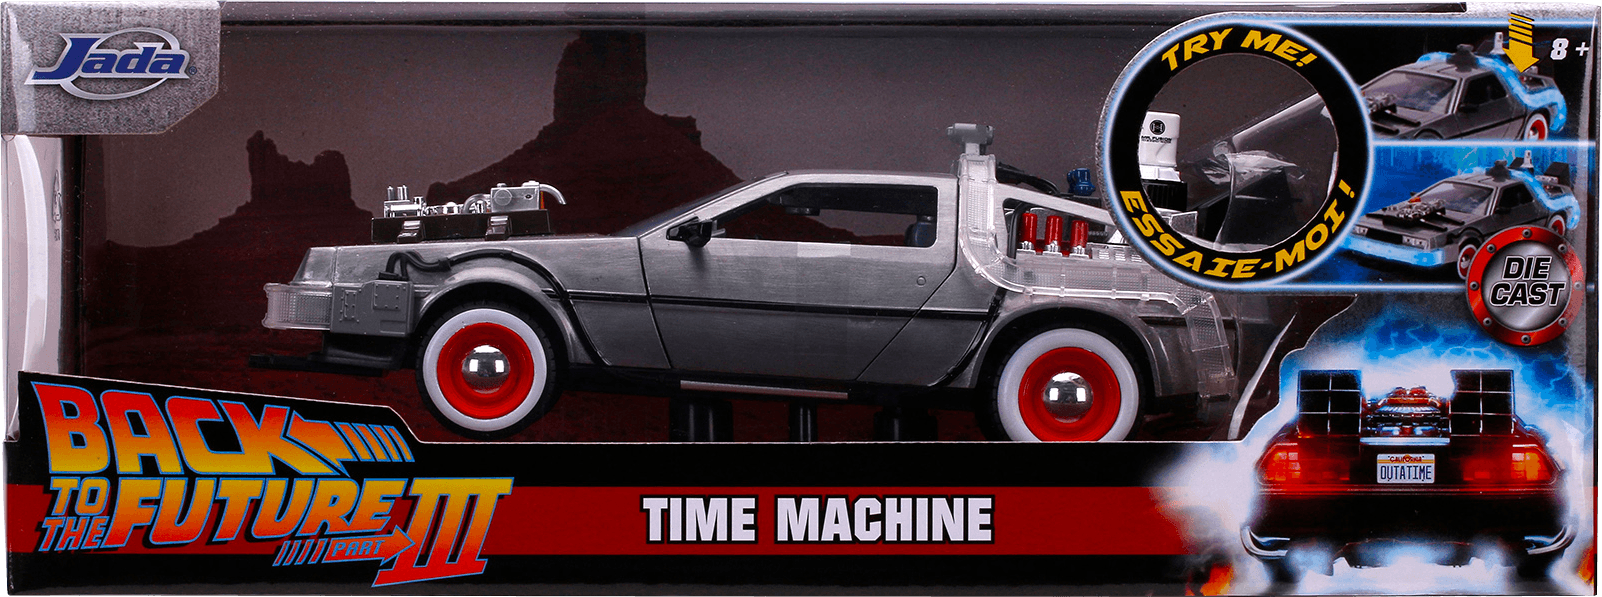 JAD32166 Back to the Future Part III - Time Machine Raw Metal 1:24 Scale Hollywood Ride - Jada Toys - Titan Pop Culture